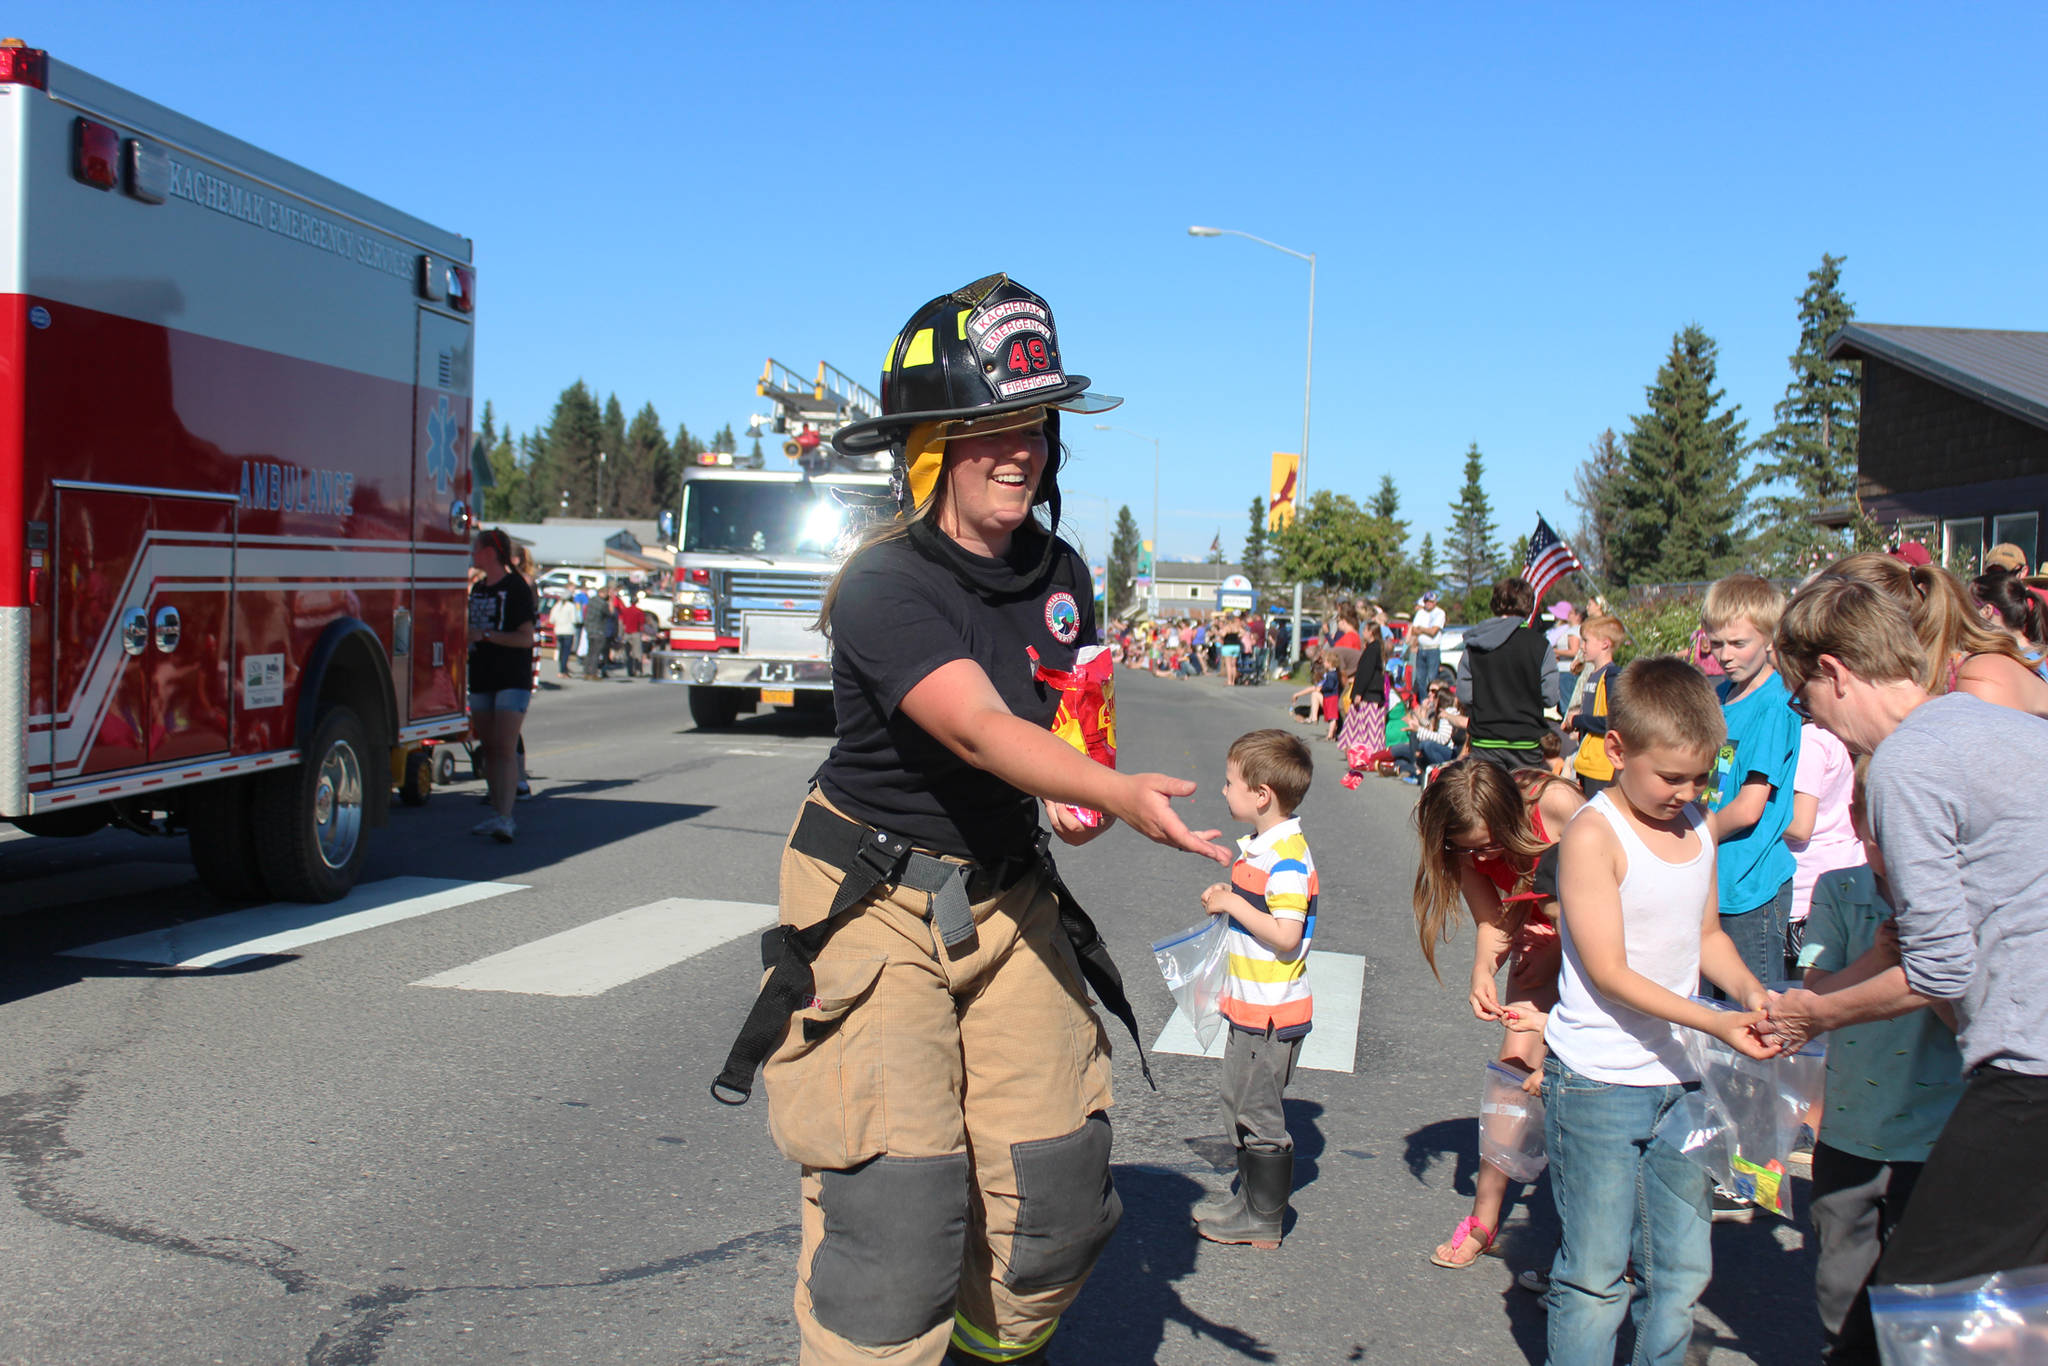 A member of Kachemak Emergency Services tosses candy to eager children along Pioneer Avenue during this year’s Independence Day parade Wednesday, July 4, 2018 in Homer, Alaska. (Photo by Megan Pacer/Homer News)